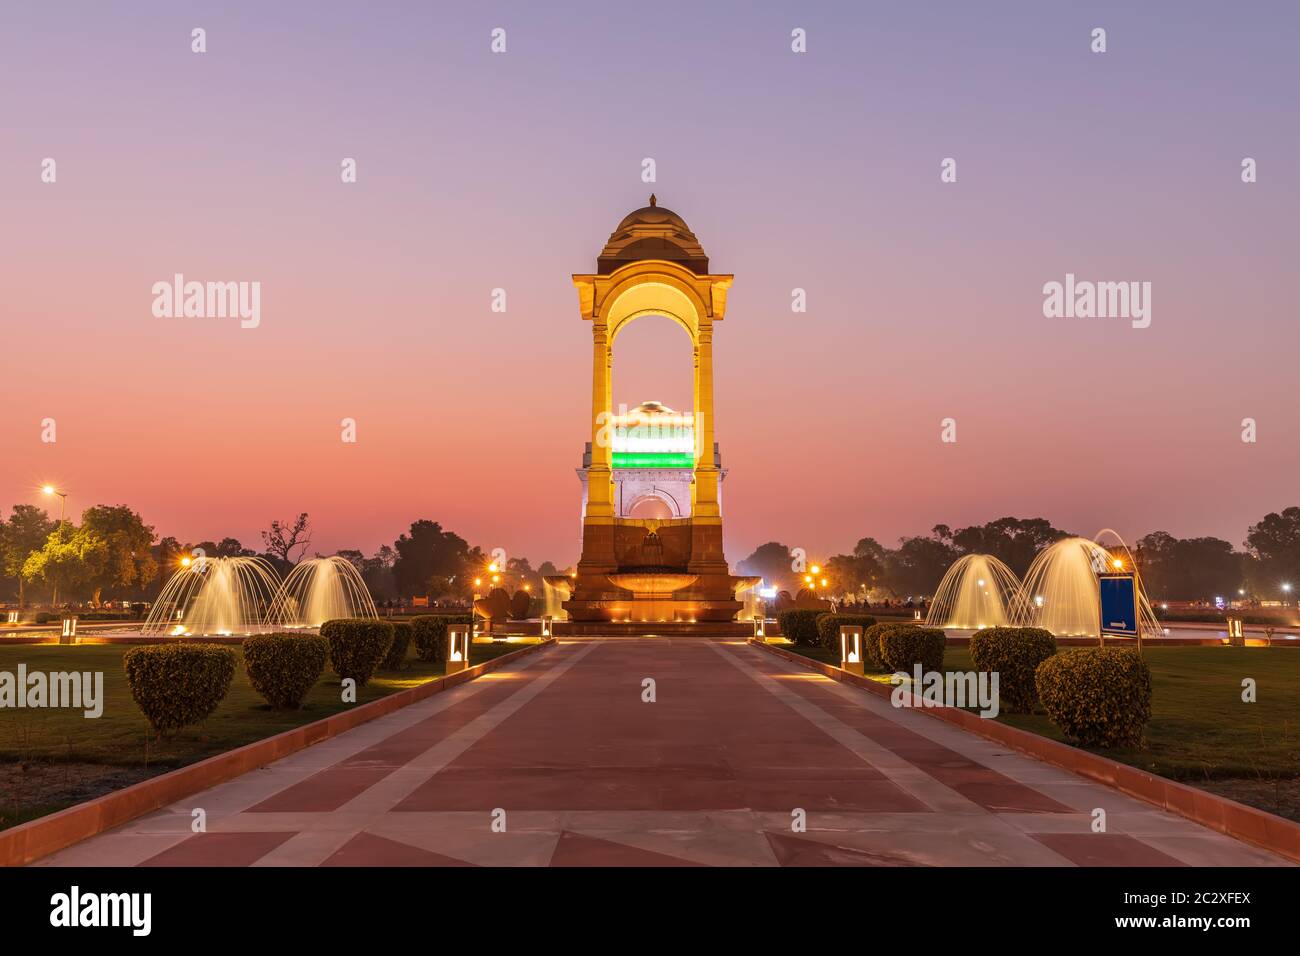 The Canopy and the India Gate in twilight, view from the National War Memorial, New Delhi, India. Stock Photo